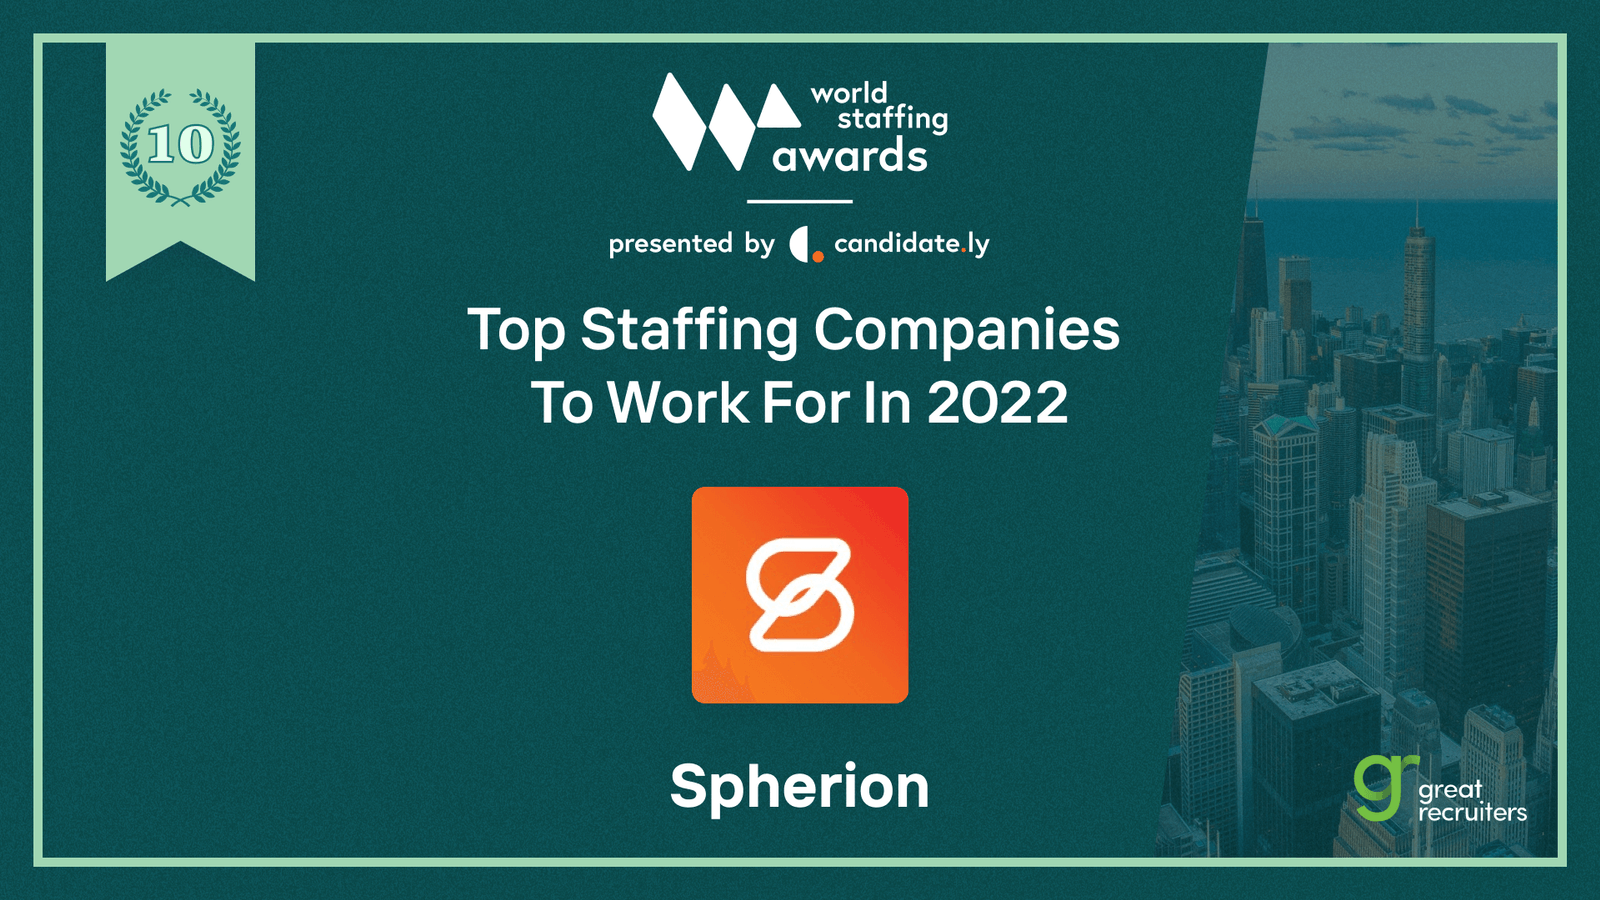 SPHERION NOMINATED IN THE 'TOP 100 STAFFING COMPANIES TO WORK FOR' 